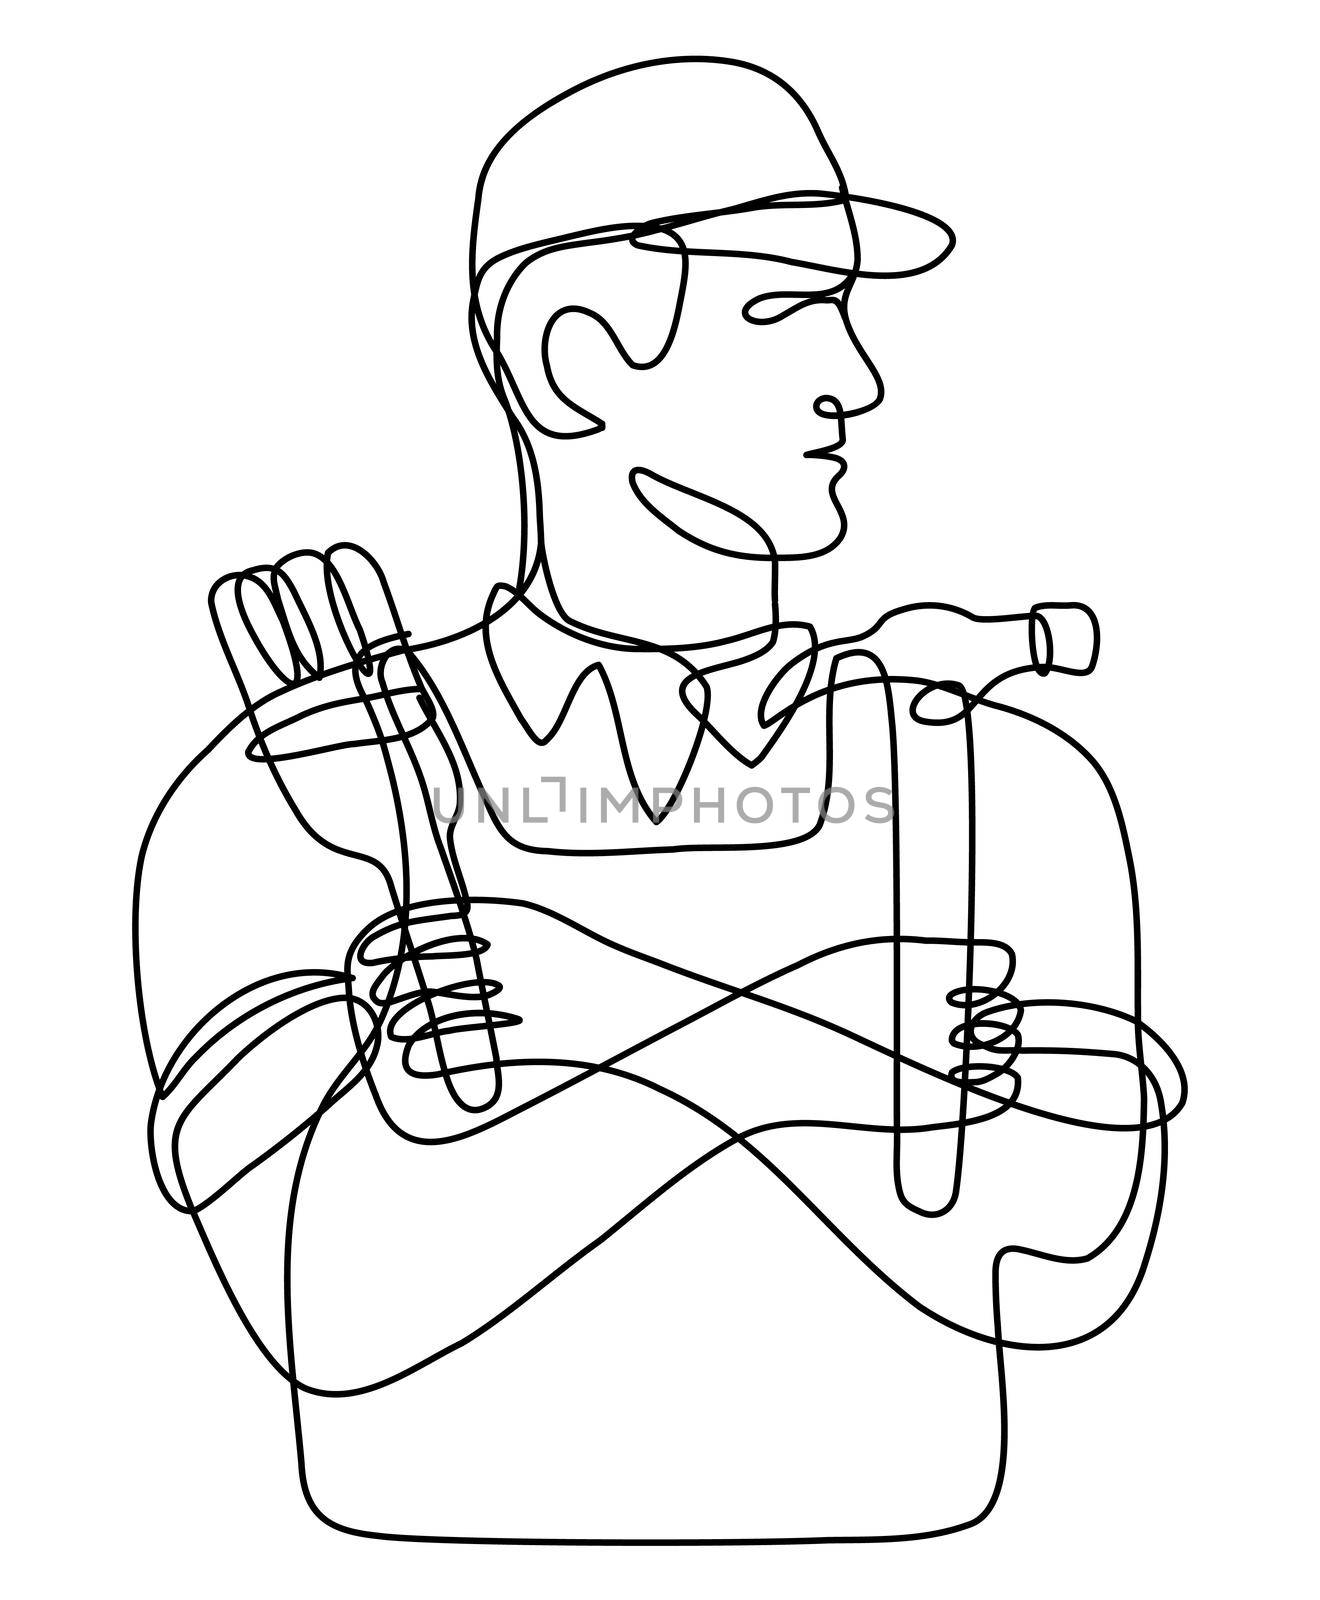 Continuous line drawing illustration of a handyman holding a hammer and paint brush with arms crossed done in mono line or doodle style in black and white on isolated background. 